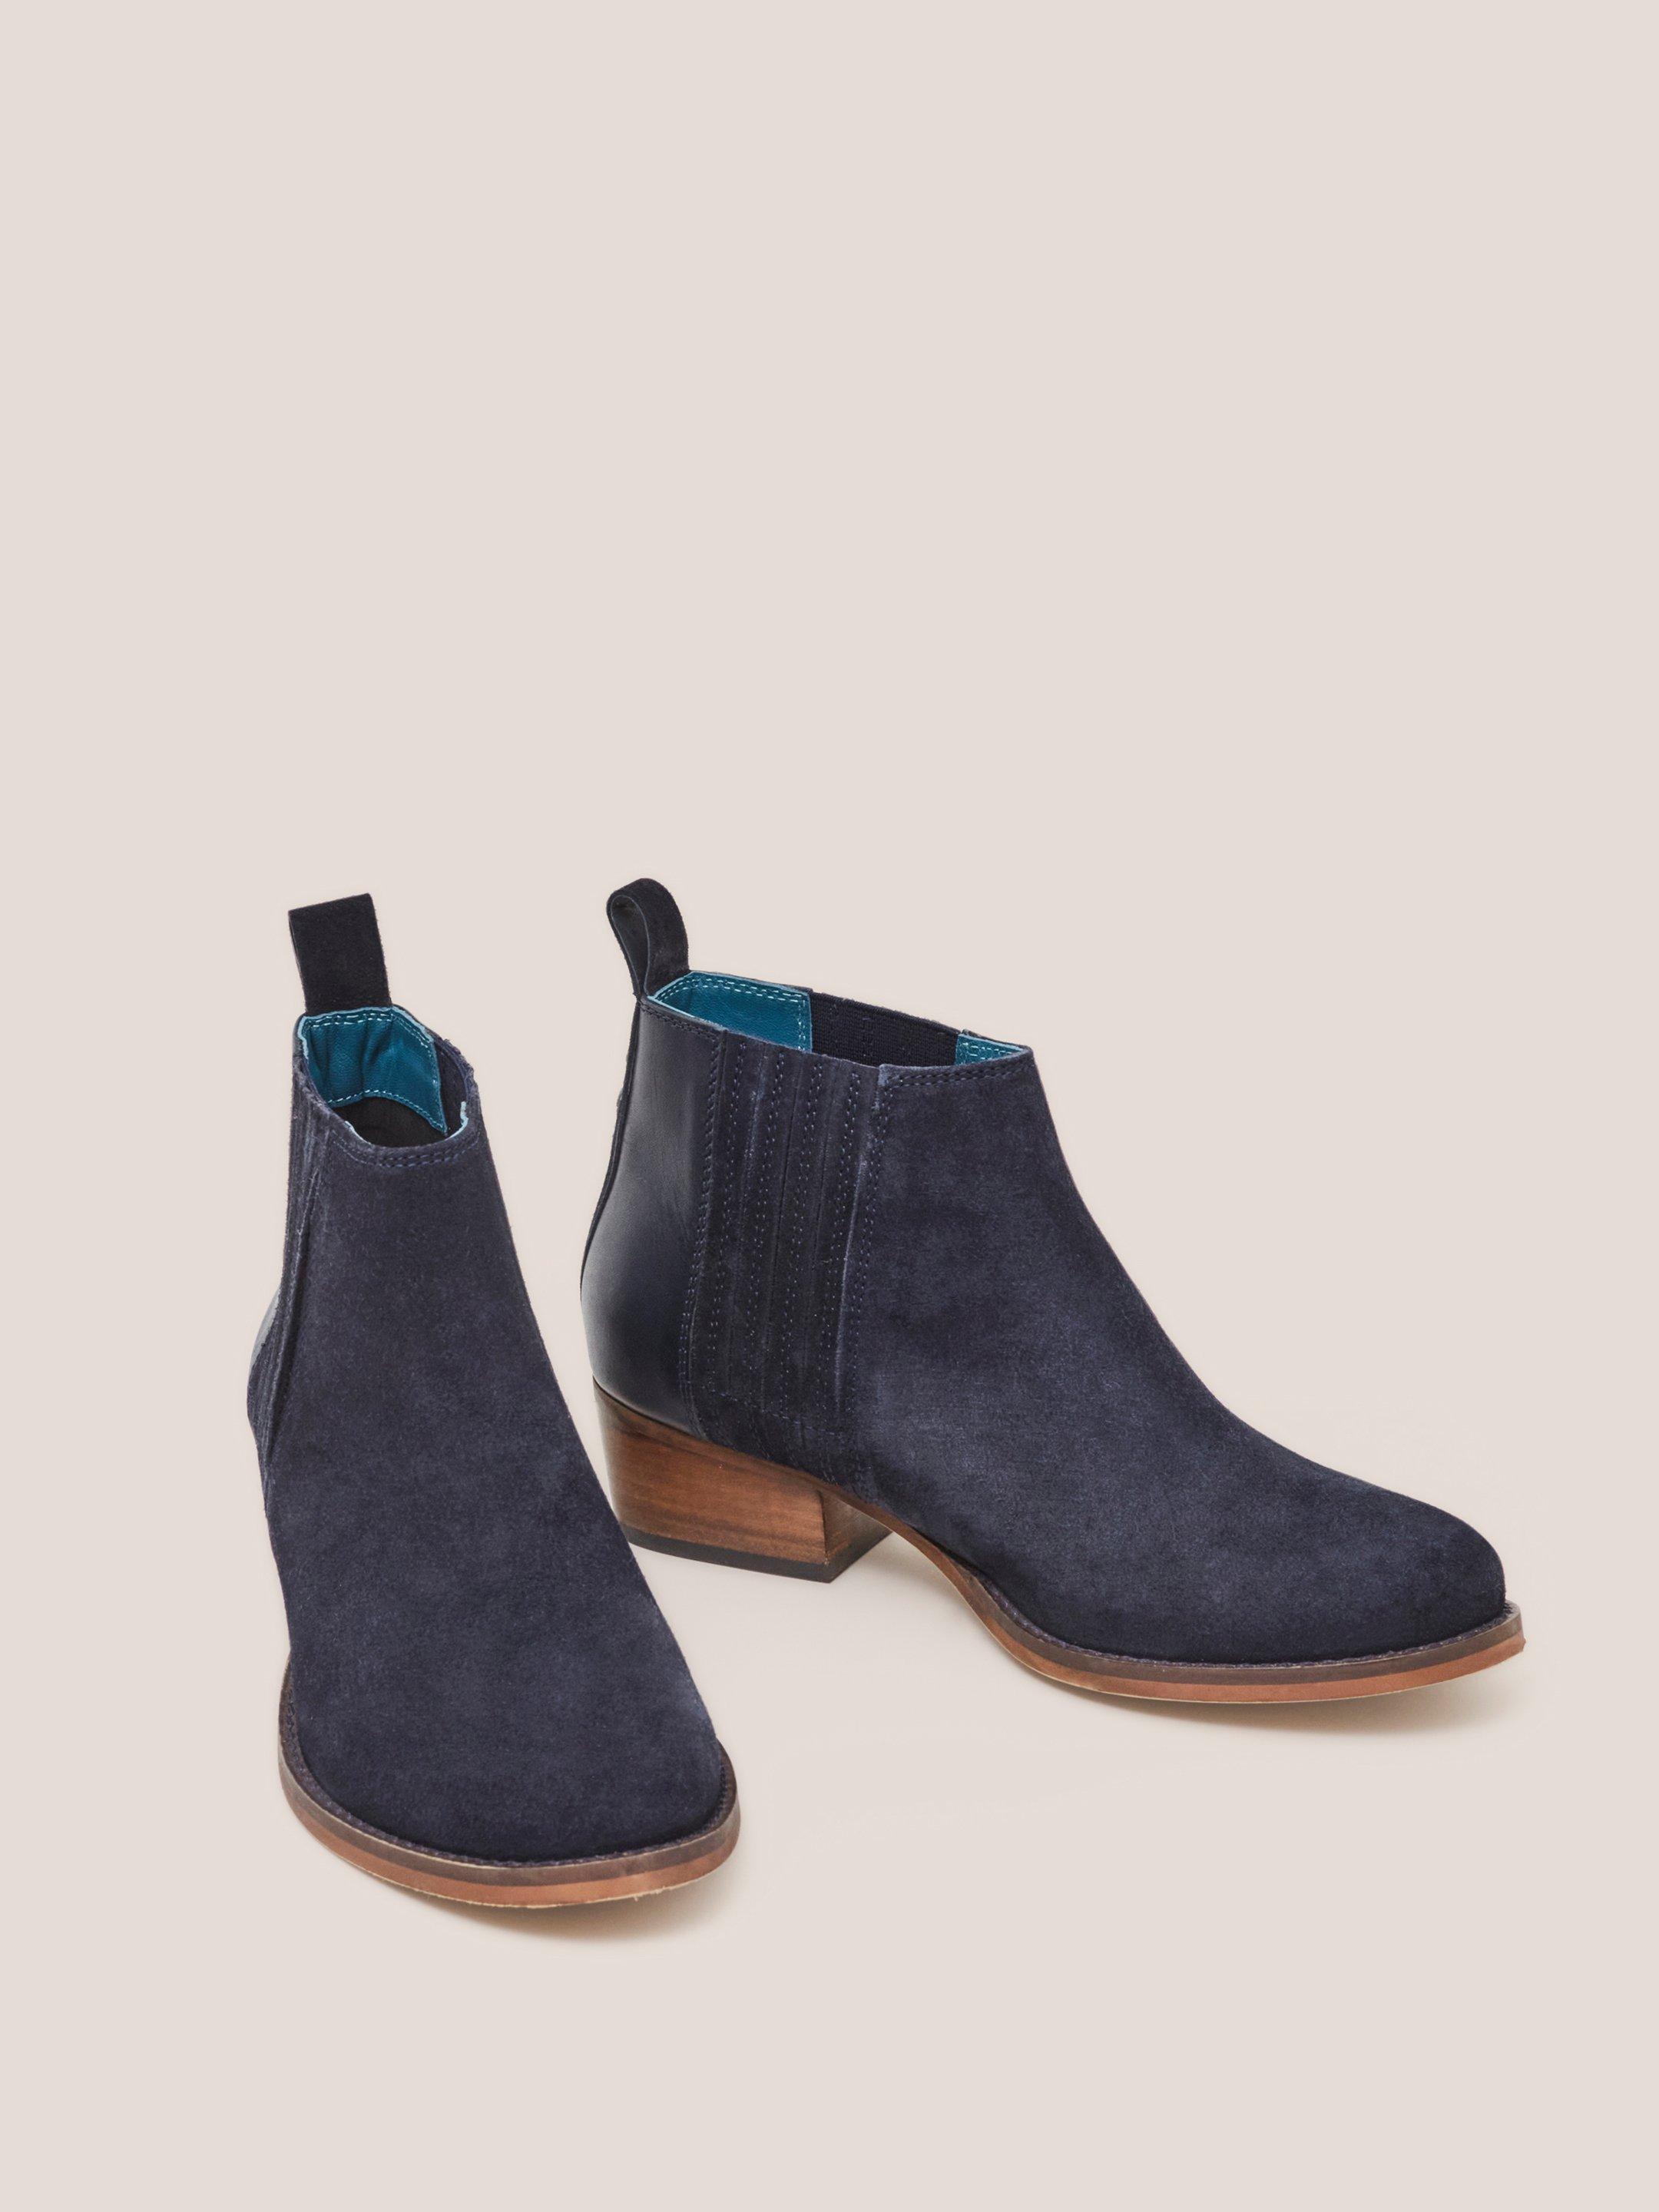 Winona Suede Ankle Boot